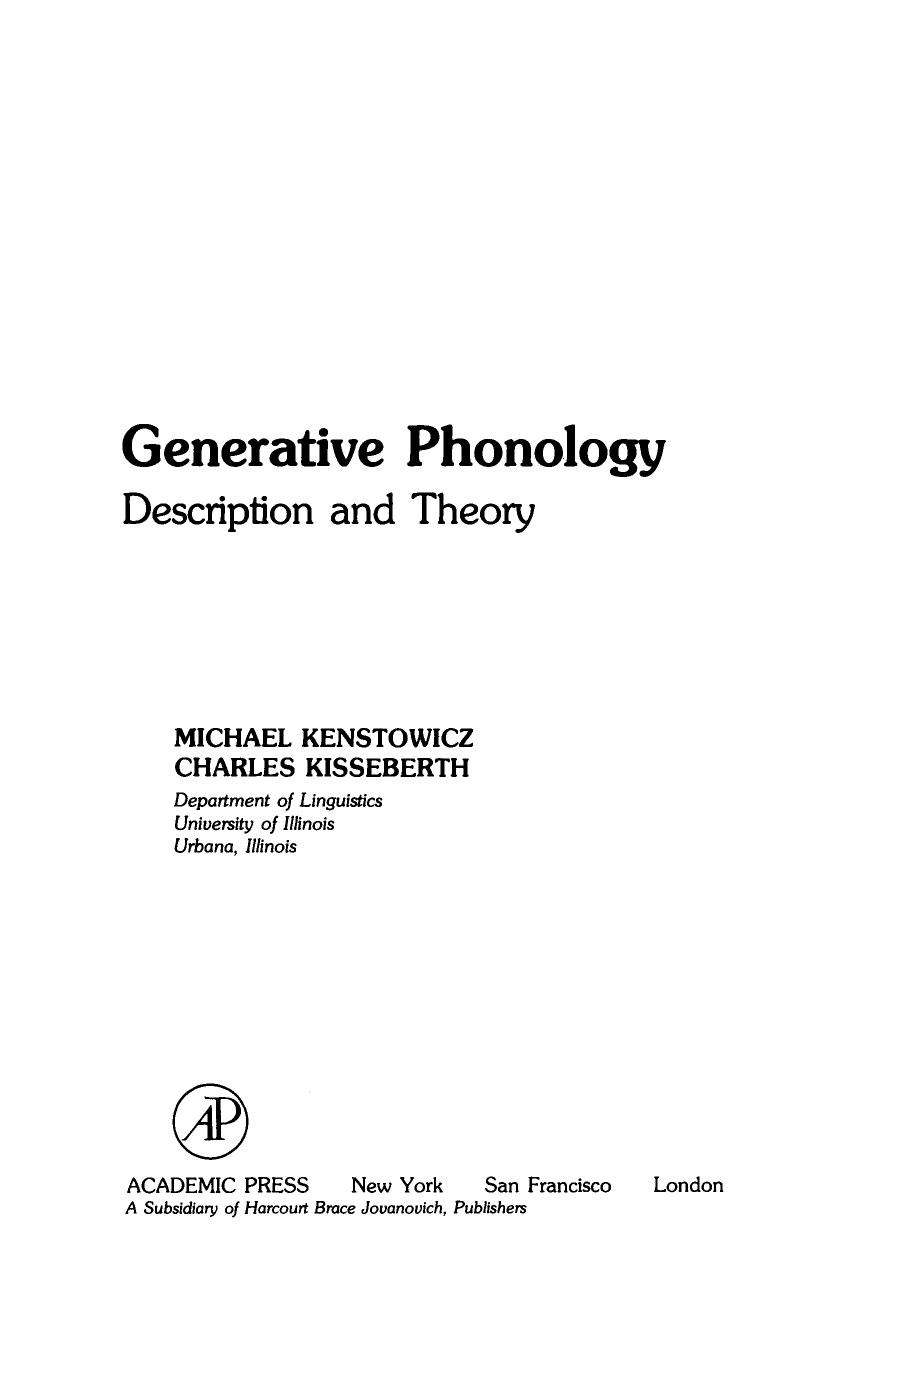 Generative Phonology. Description and Theory 1979